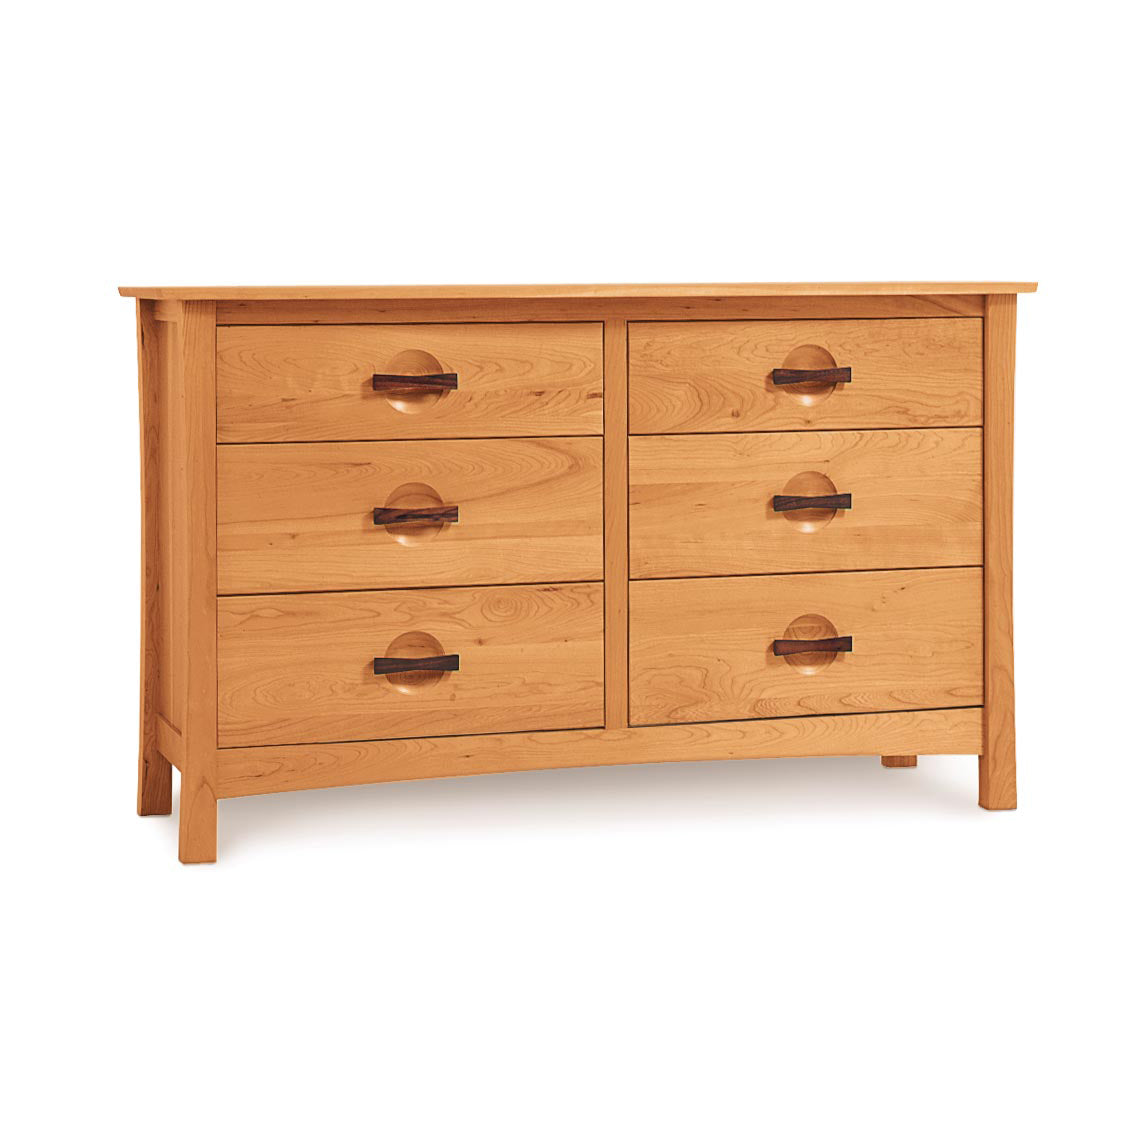 A wooden dresser with drawers on it.